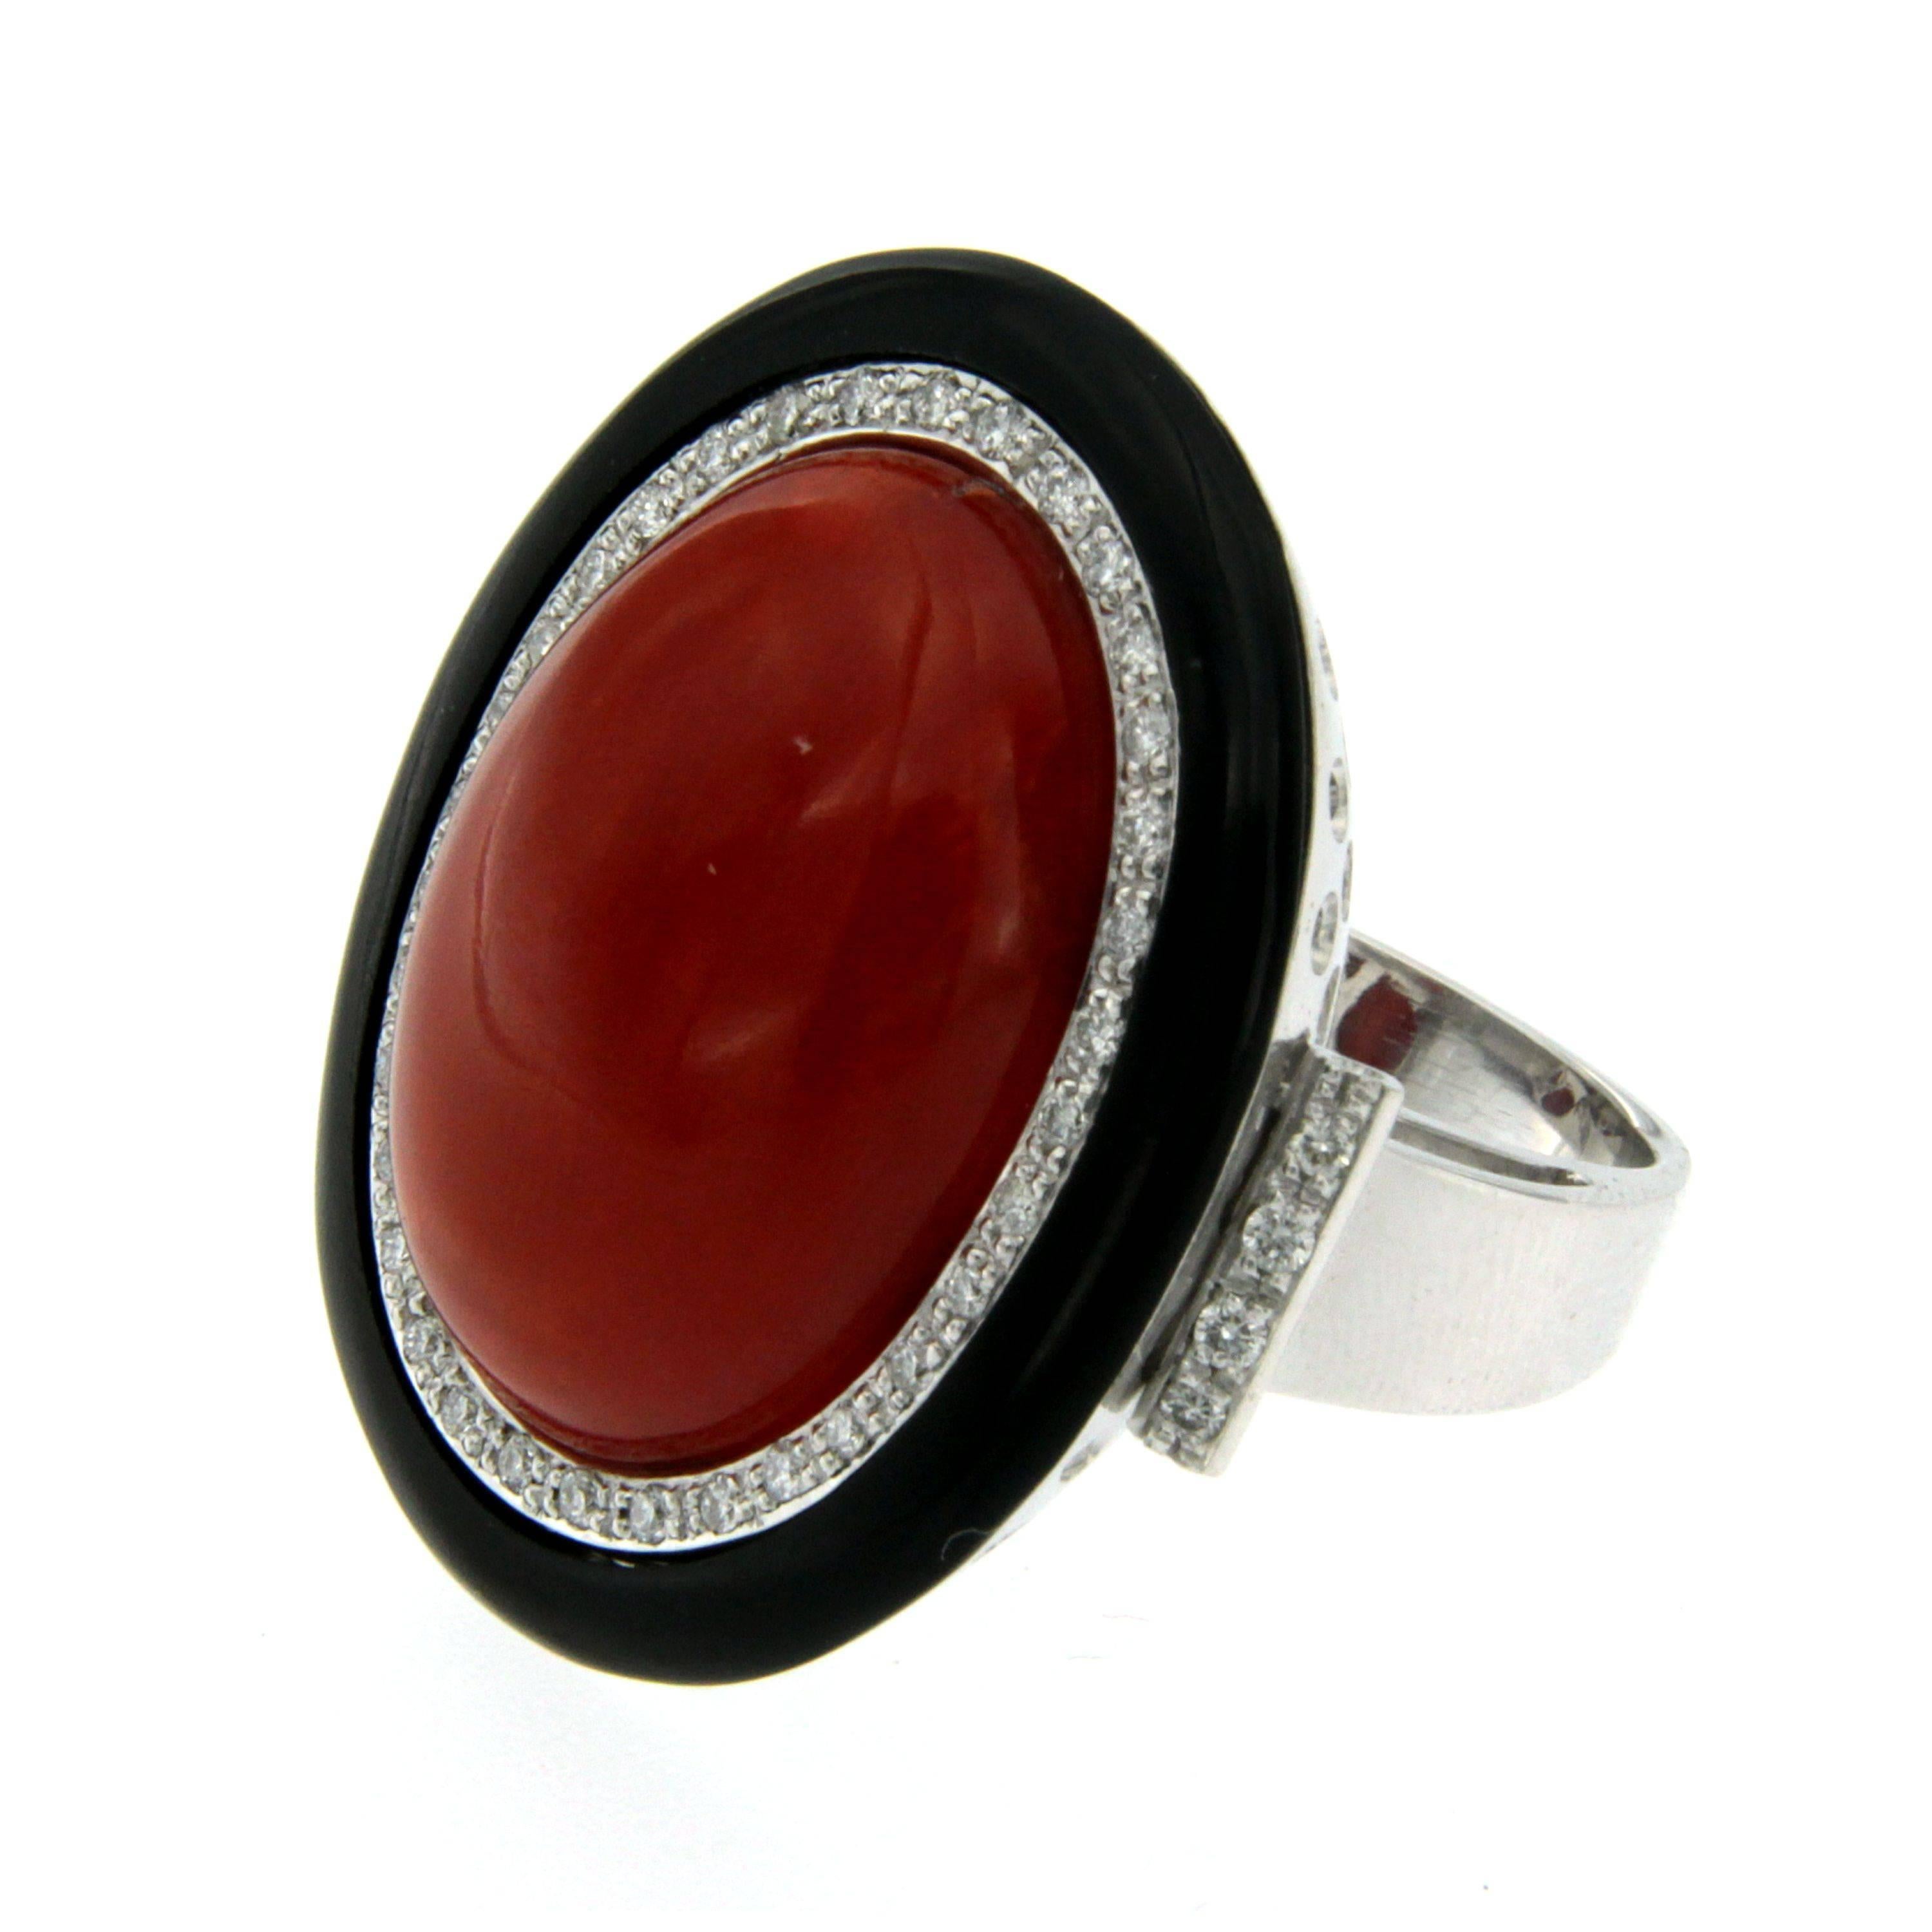 Offered for sale this truly exclusive vintage ring circa 1960' Italian origin

Individually hand crafted of solid 18 Kt white gold (marked) in the finest manner and over cared in the slightest detail
The red Coral cabochon graded Aka (Moro) is of